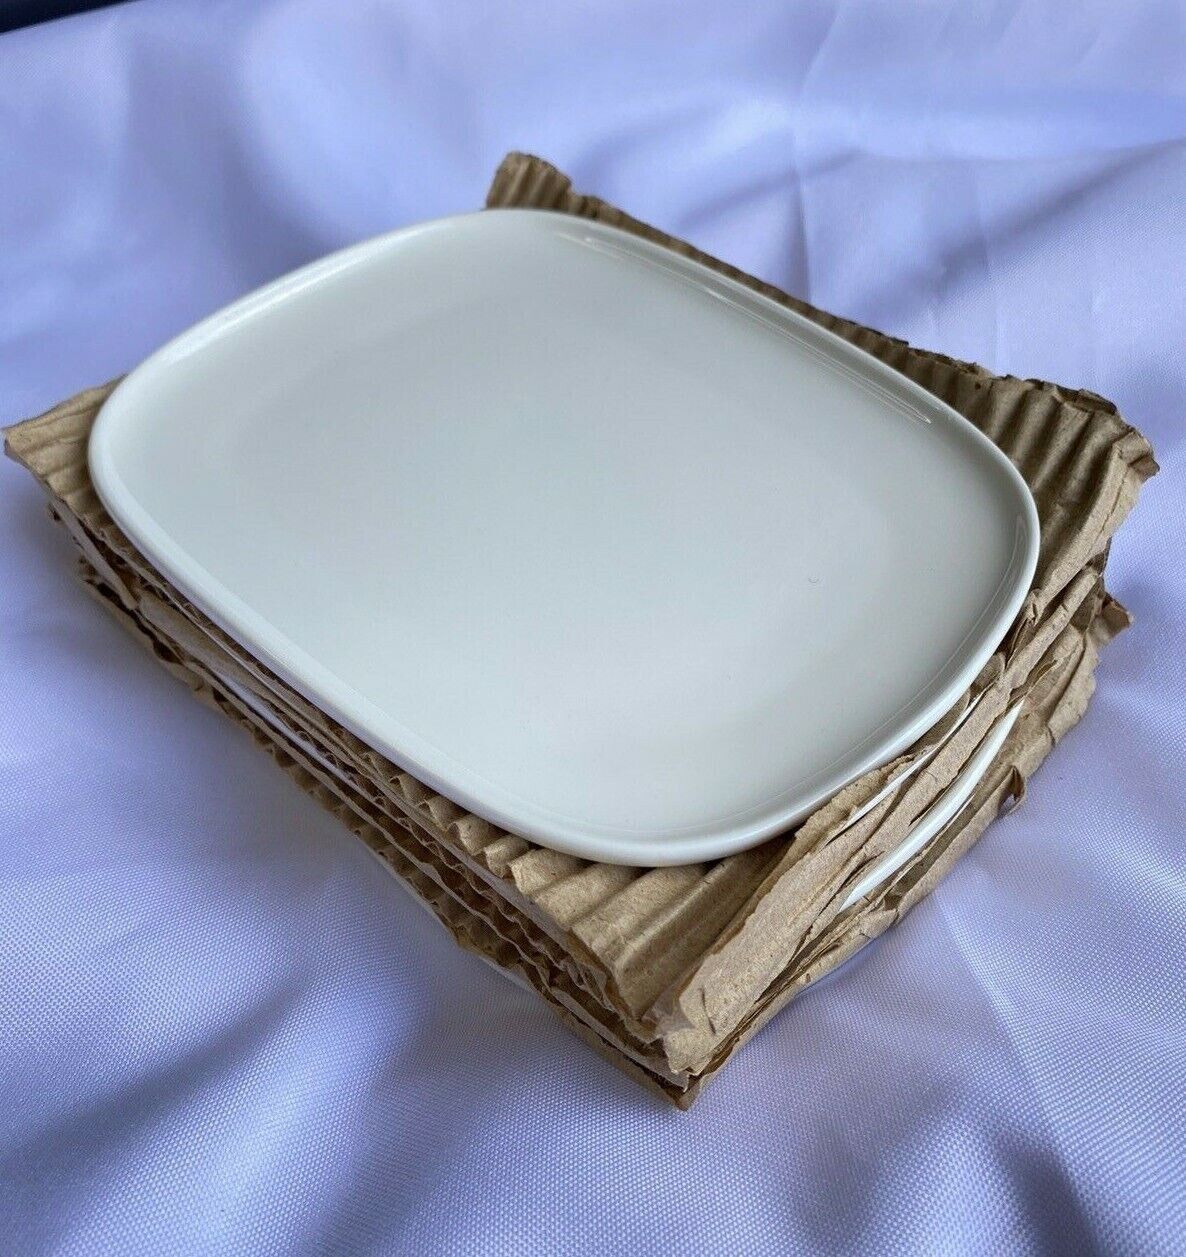 ALESSI white porcelain plates 6 pieces lot Italy for Delta Airlines minimalistic